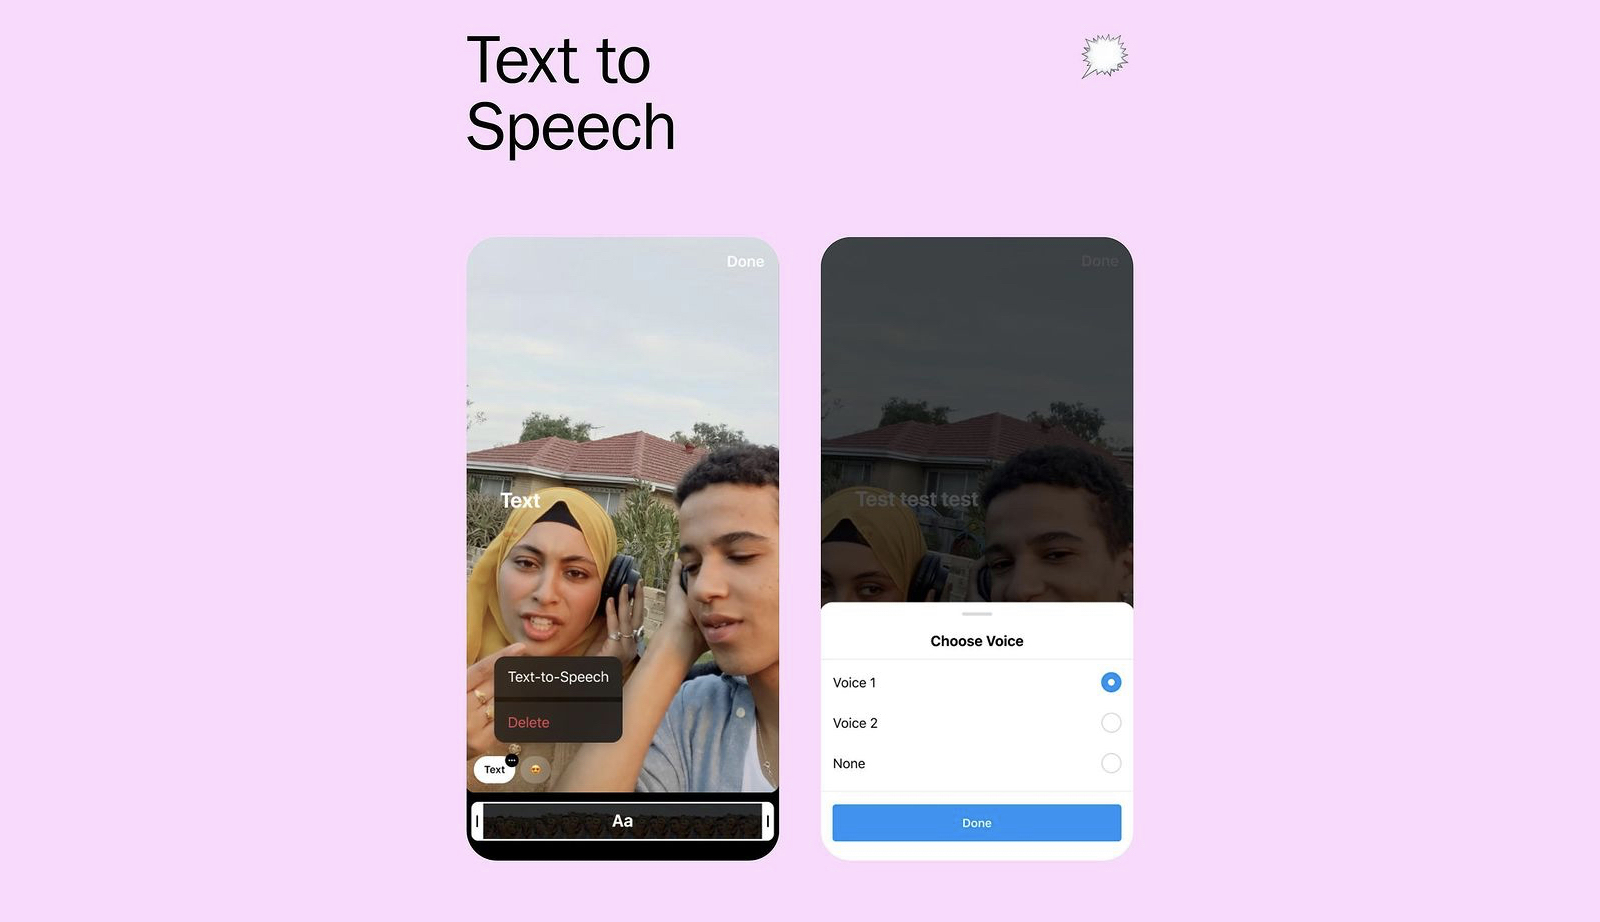 Instagram adds TikTok-like Text-to-Speech and Voice Effects tools to Reels  | TechCrunch